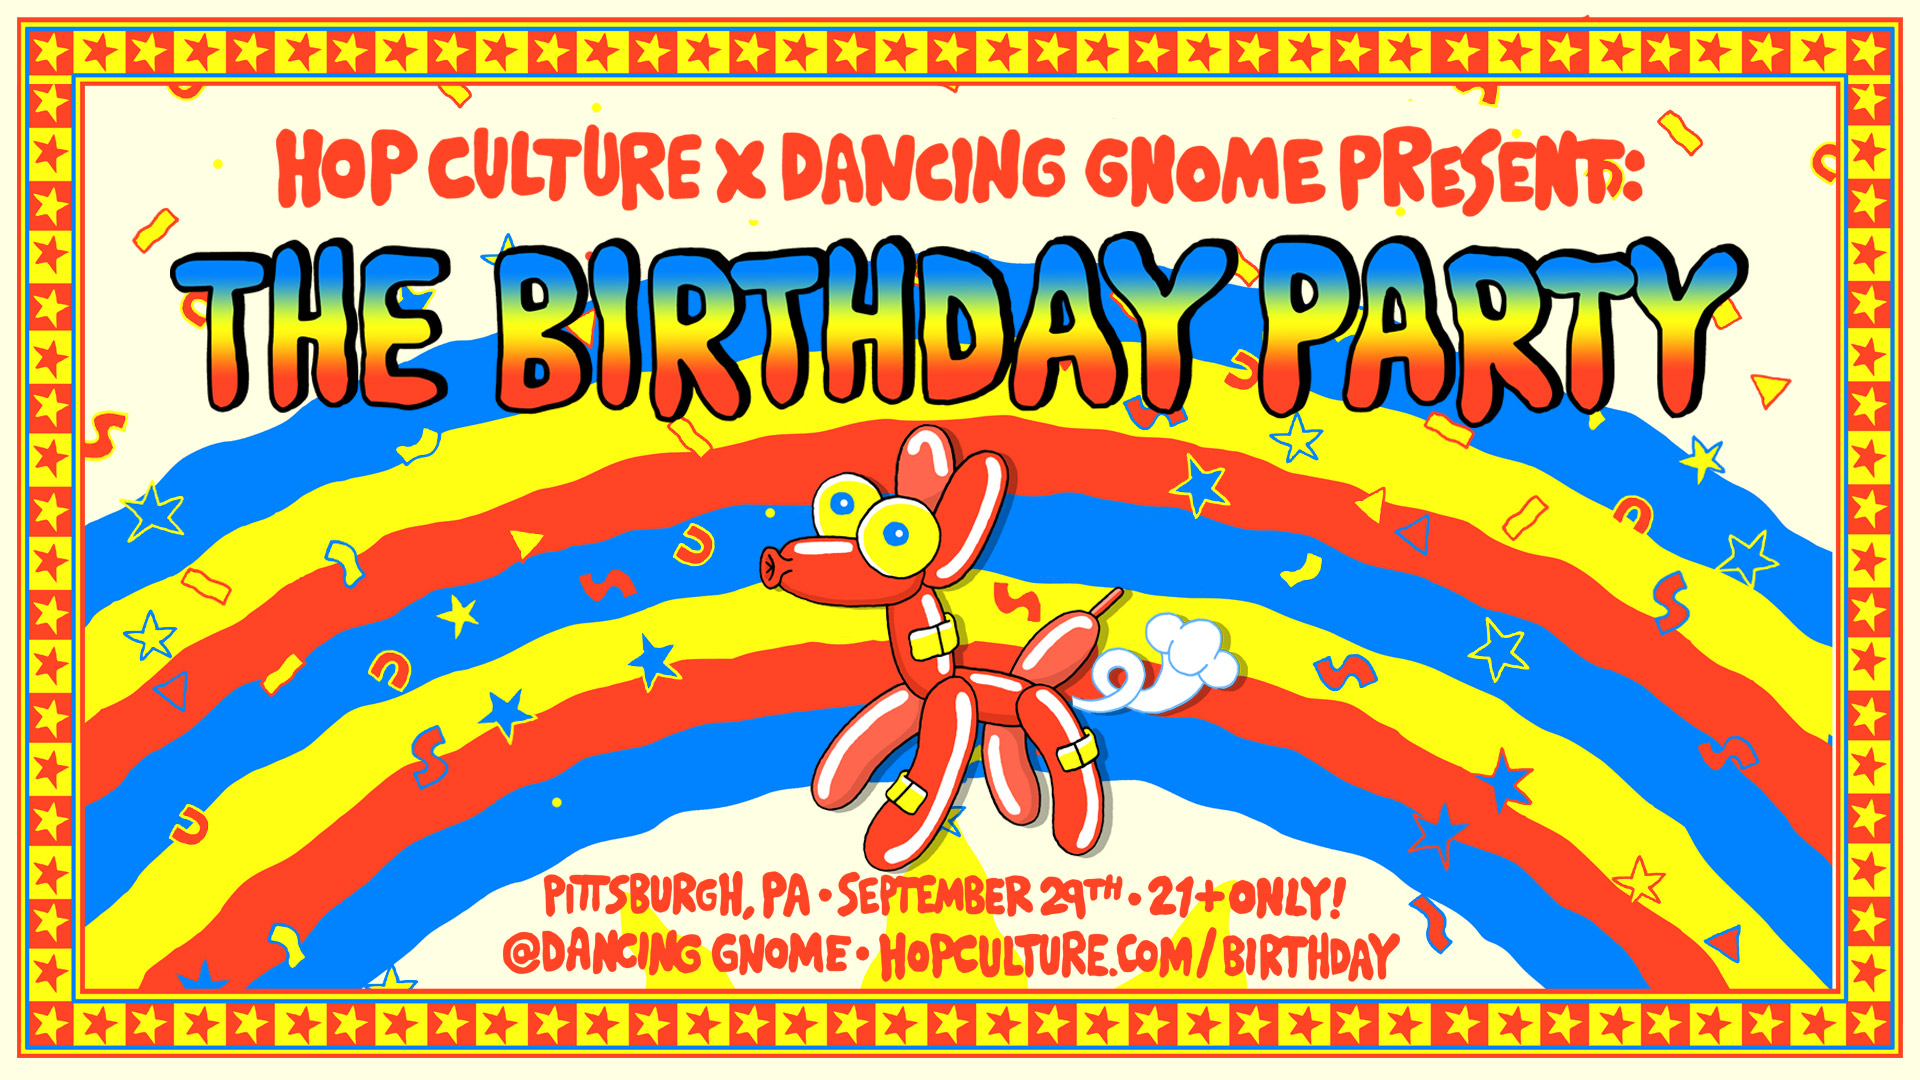 Hop Culture and Dancing Gnome Announce The Birthday Party